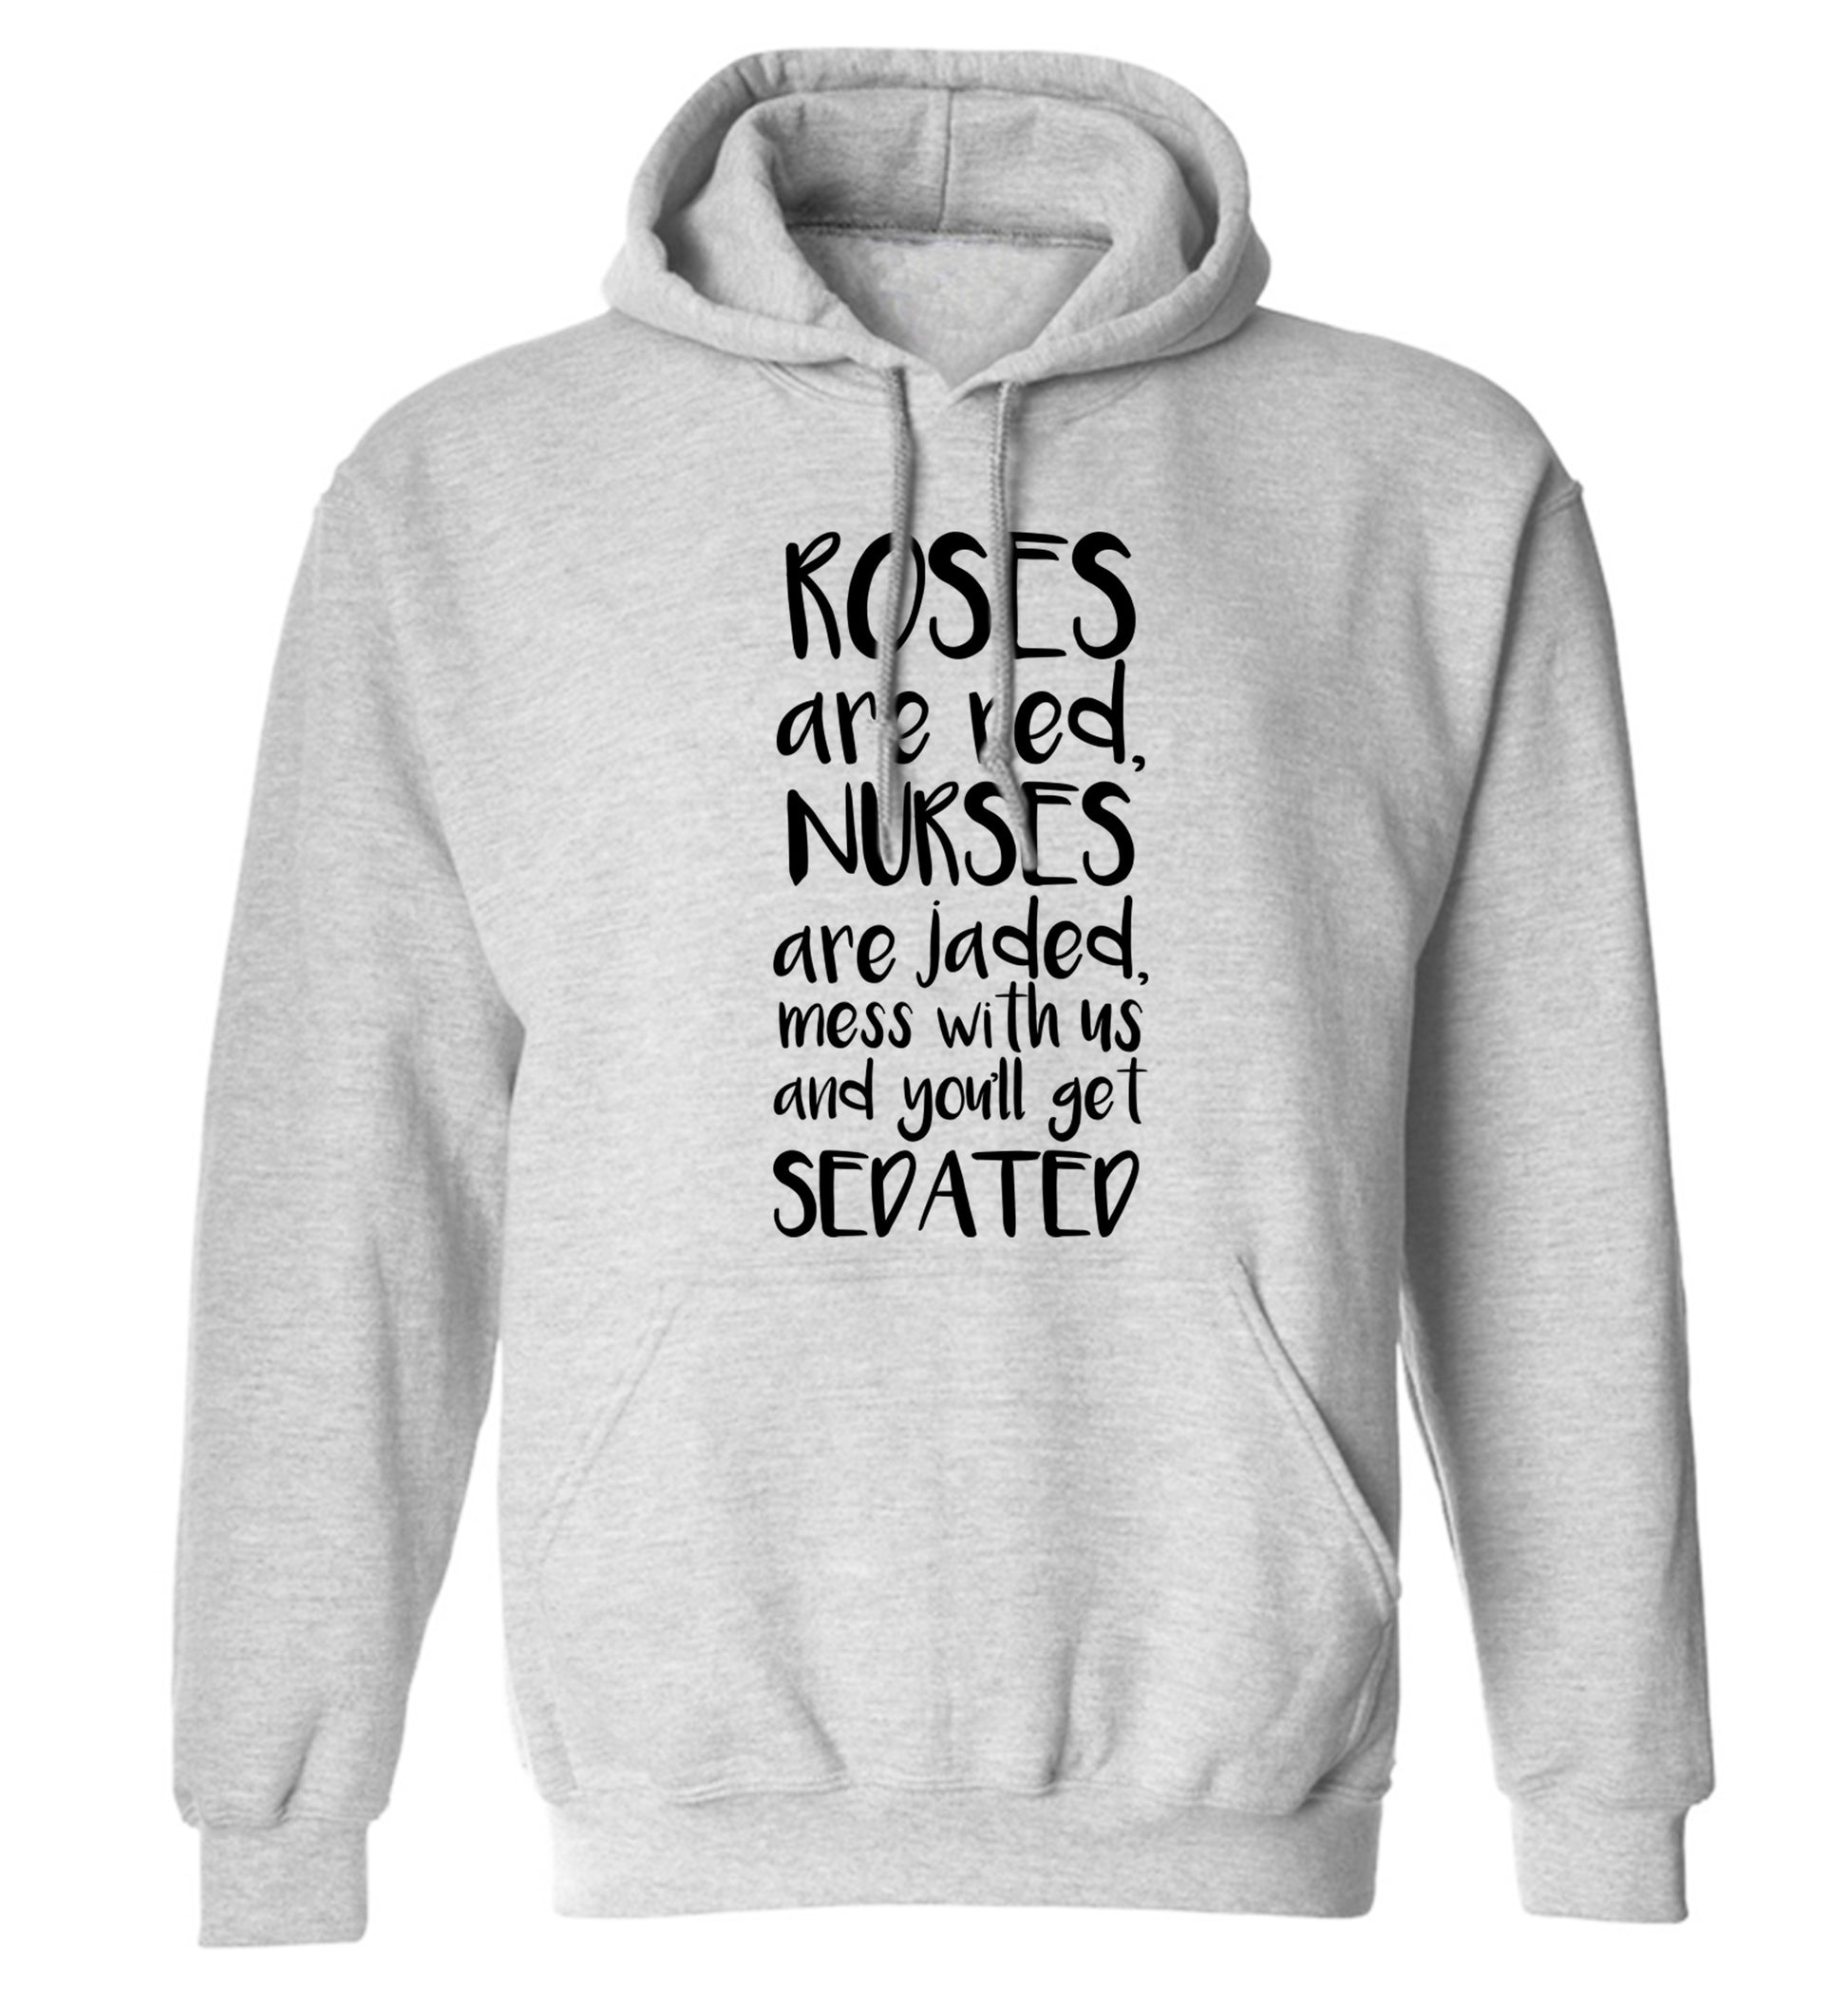 Roses are red, nurses are jaded, mess with us and you'll get sedated adults unisex grey hoodie 2XL